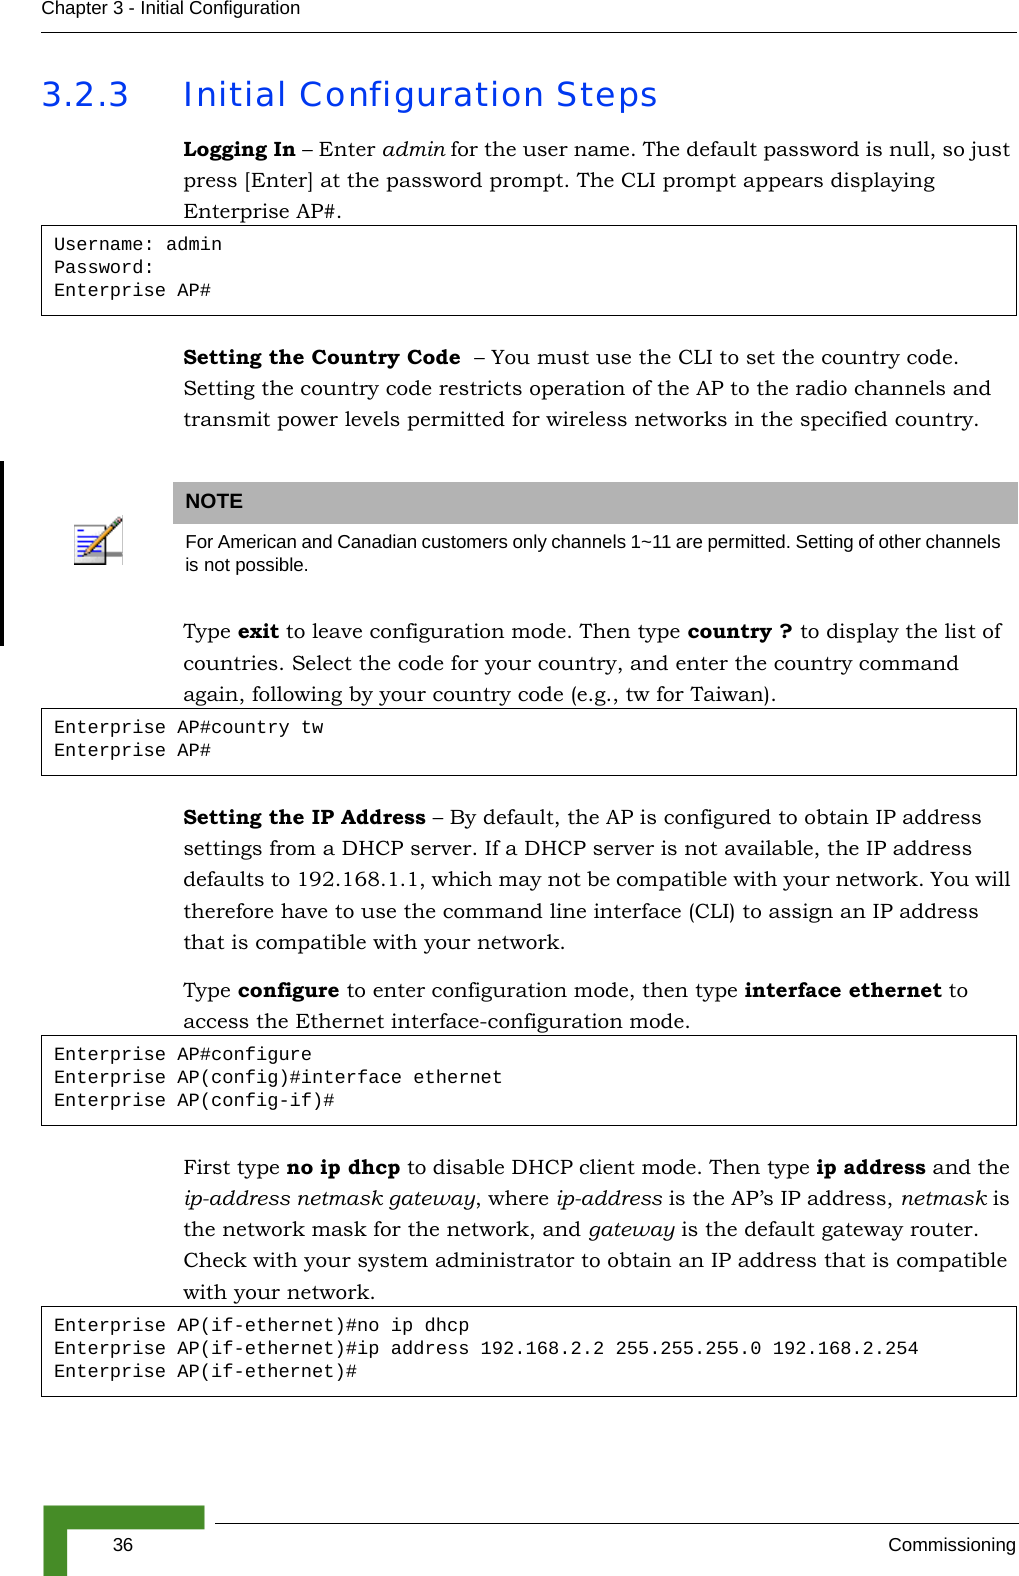 36 CommissioningChapter 3 - Initial Configuration3.2.3 Initial Configuration StepsLogging In – Enter admin for the user name. The default password is null, so just press [Enter] at the password prompt. The CLI prompt appears displaying Enterprise AP#.Setting the Country Code  – You must use the CLI to set the country code. Setting the country code restricts operation of the AP to the radio channels and transmit power levels permitted for wireless networks in the specified country. Type exit to leave configuration mode. Then type country ? to display the list of countries. Select the code for your country, and enter the country command again, following by your country code (e.g., tw for Taiwan).Setting the IP Address – By default, the AP is configured to obtain IP address settings from a DHCP server. If a DHCP server is not available, the IP address defaults to 192.168.1.1, which may not be compatible with your network. You will therefore have to use the command line interface (CLI) to assign an IP address that is compatible with your network. Type configure to enter configuration mode, then type interface ethernet to access the Ethernet interface-configuration mode.First type no ip dhcp to disable DHCP client mode. Then type ip address and the ip-address netmask gateway, where ip-address is the AP’s IP address, netmask is the network mask for the network, and gateway is the default gateway router. Check with your system administrator to obtain an IP address that is compatible with your network.Username: adminPassword: Enterprise AP#NOTEFor American and Canadian customers only channels 1~11 are permitted. Setting of other channels is not possible. Enterprise AP#country twEnterprise AP#Enterprise AP#configureEnterprise AP(config)#interface ethernetEnterprise AP(config-if)#Enterprise AP(if-ethernet)#no ip dhcpEnterprise AP(if-ethernet)#ip address 192.168.2.2 255.255.255.0 192.168.2.254Enterprise AP(if-ethernet)#